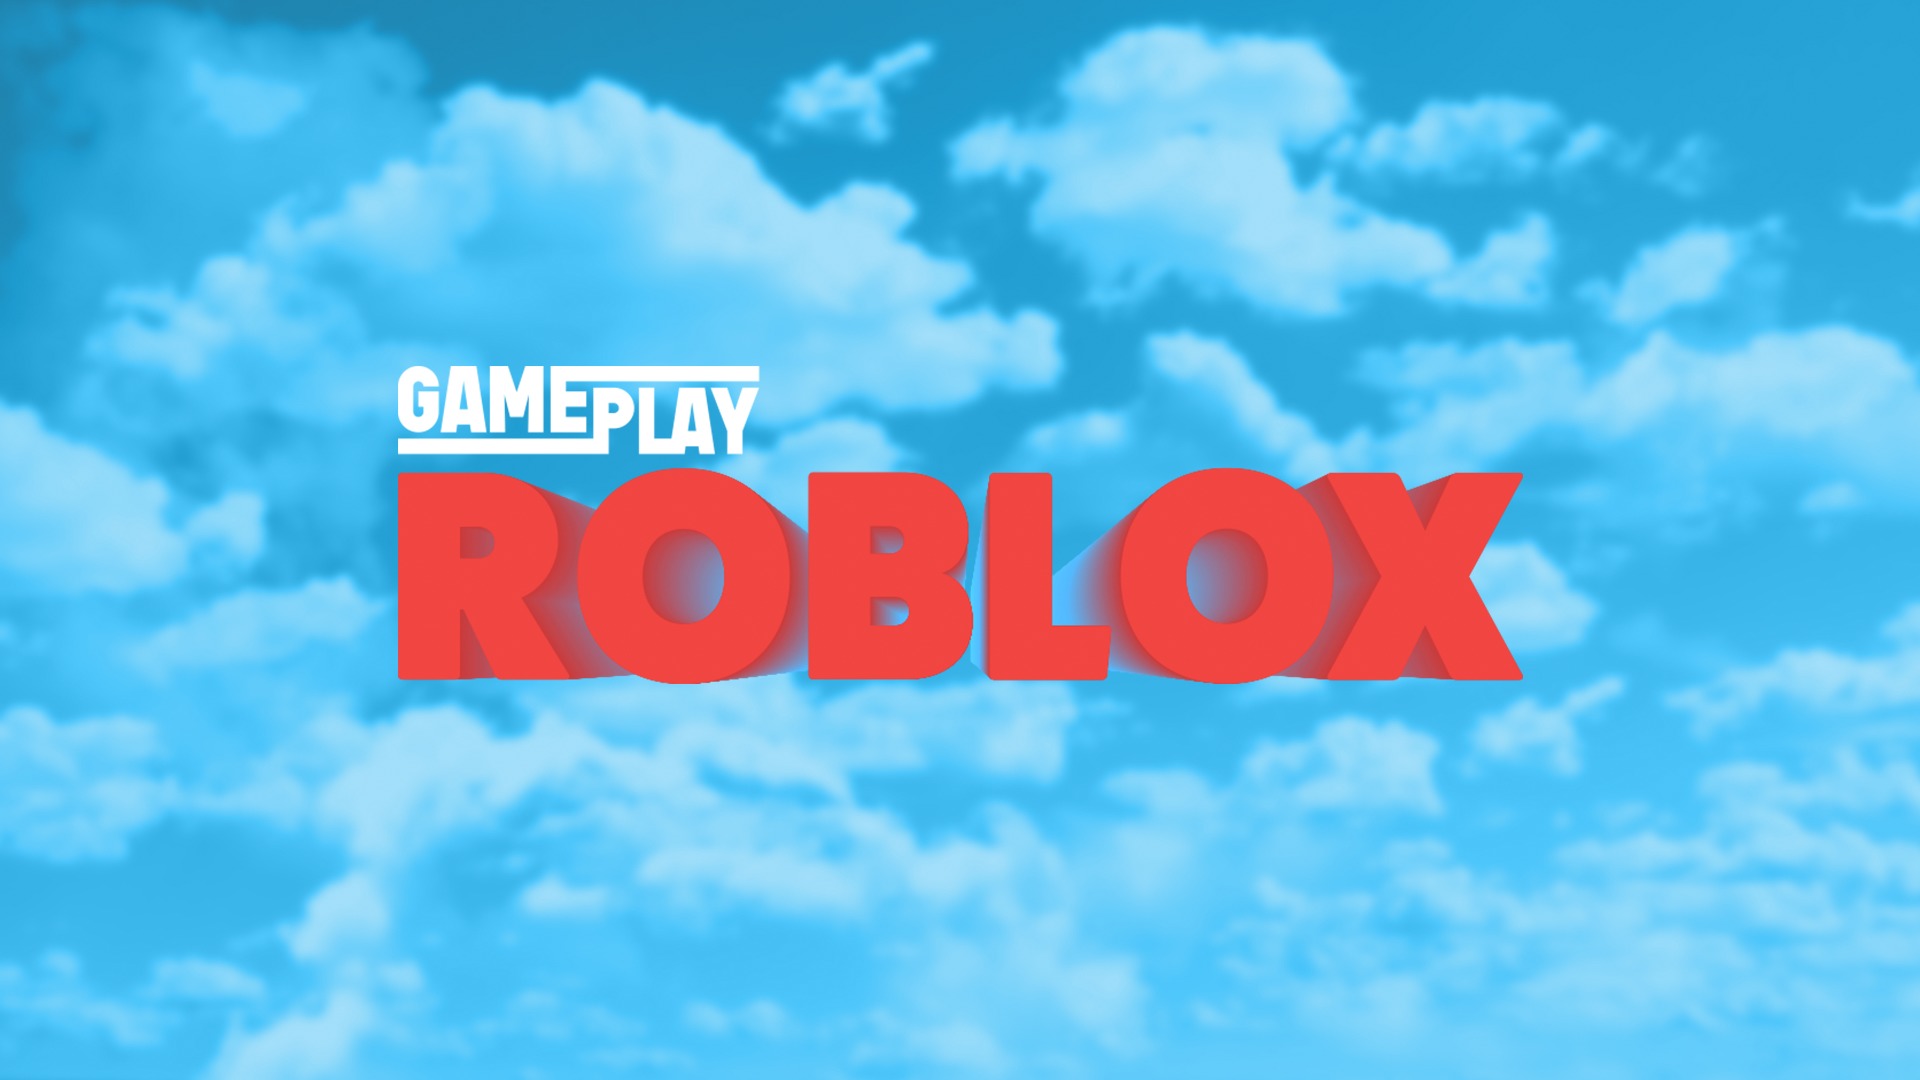 Pluto Tv Adds This Old House Roblox To Its Growing Library Of Channels Cord Cutters News - roblox the series tv series 2019 imdb